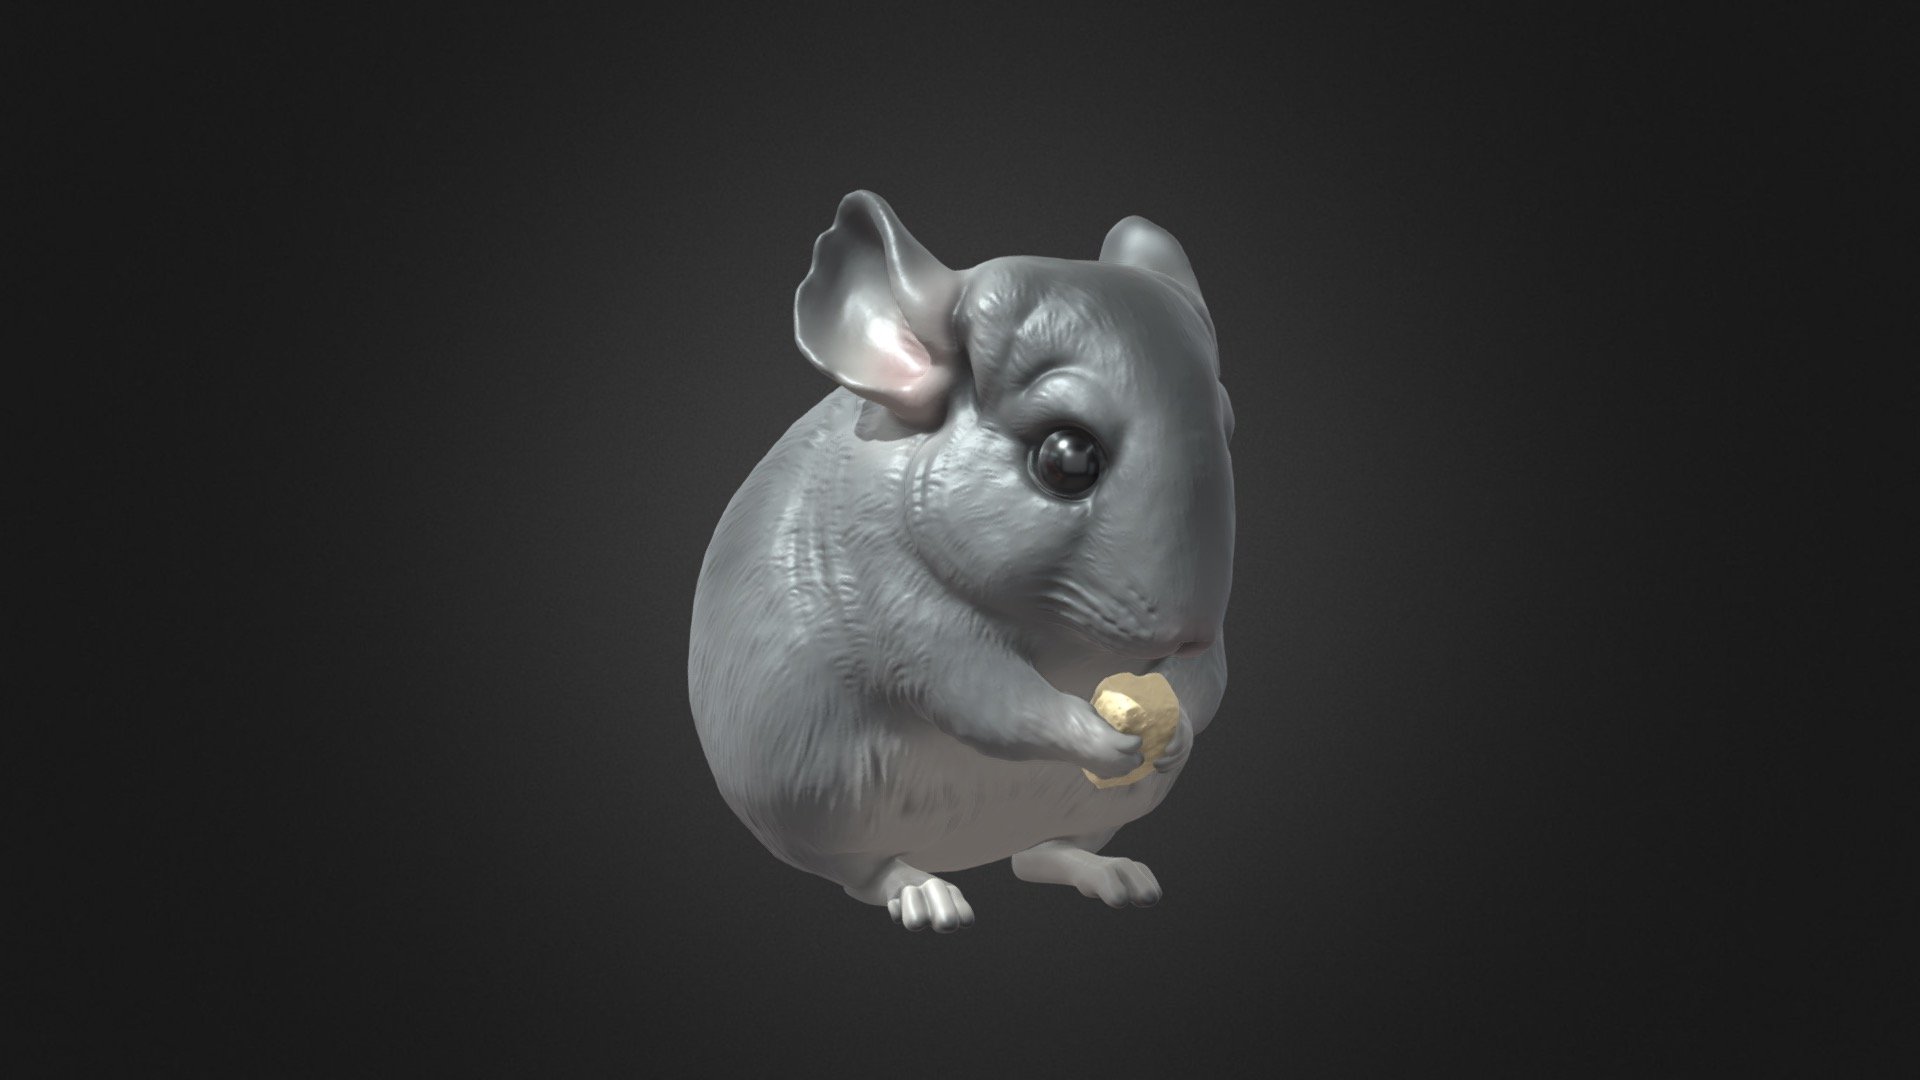 Seed by mi custom made Chinchilla figurine.

Interested to order custom made figurine?  Please visit our online store, facebook page or instagram 3d model